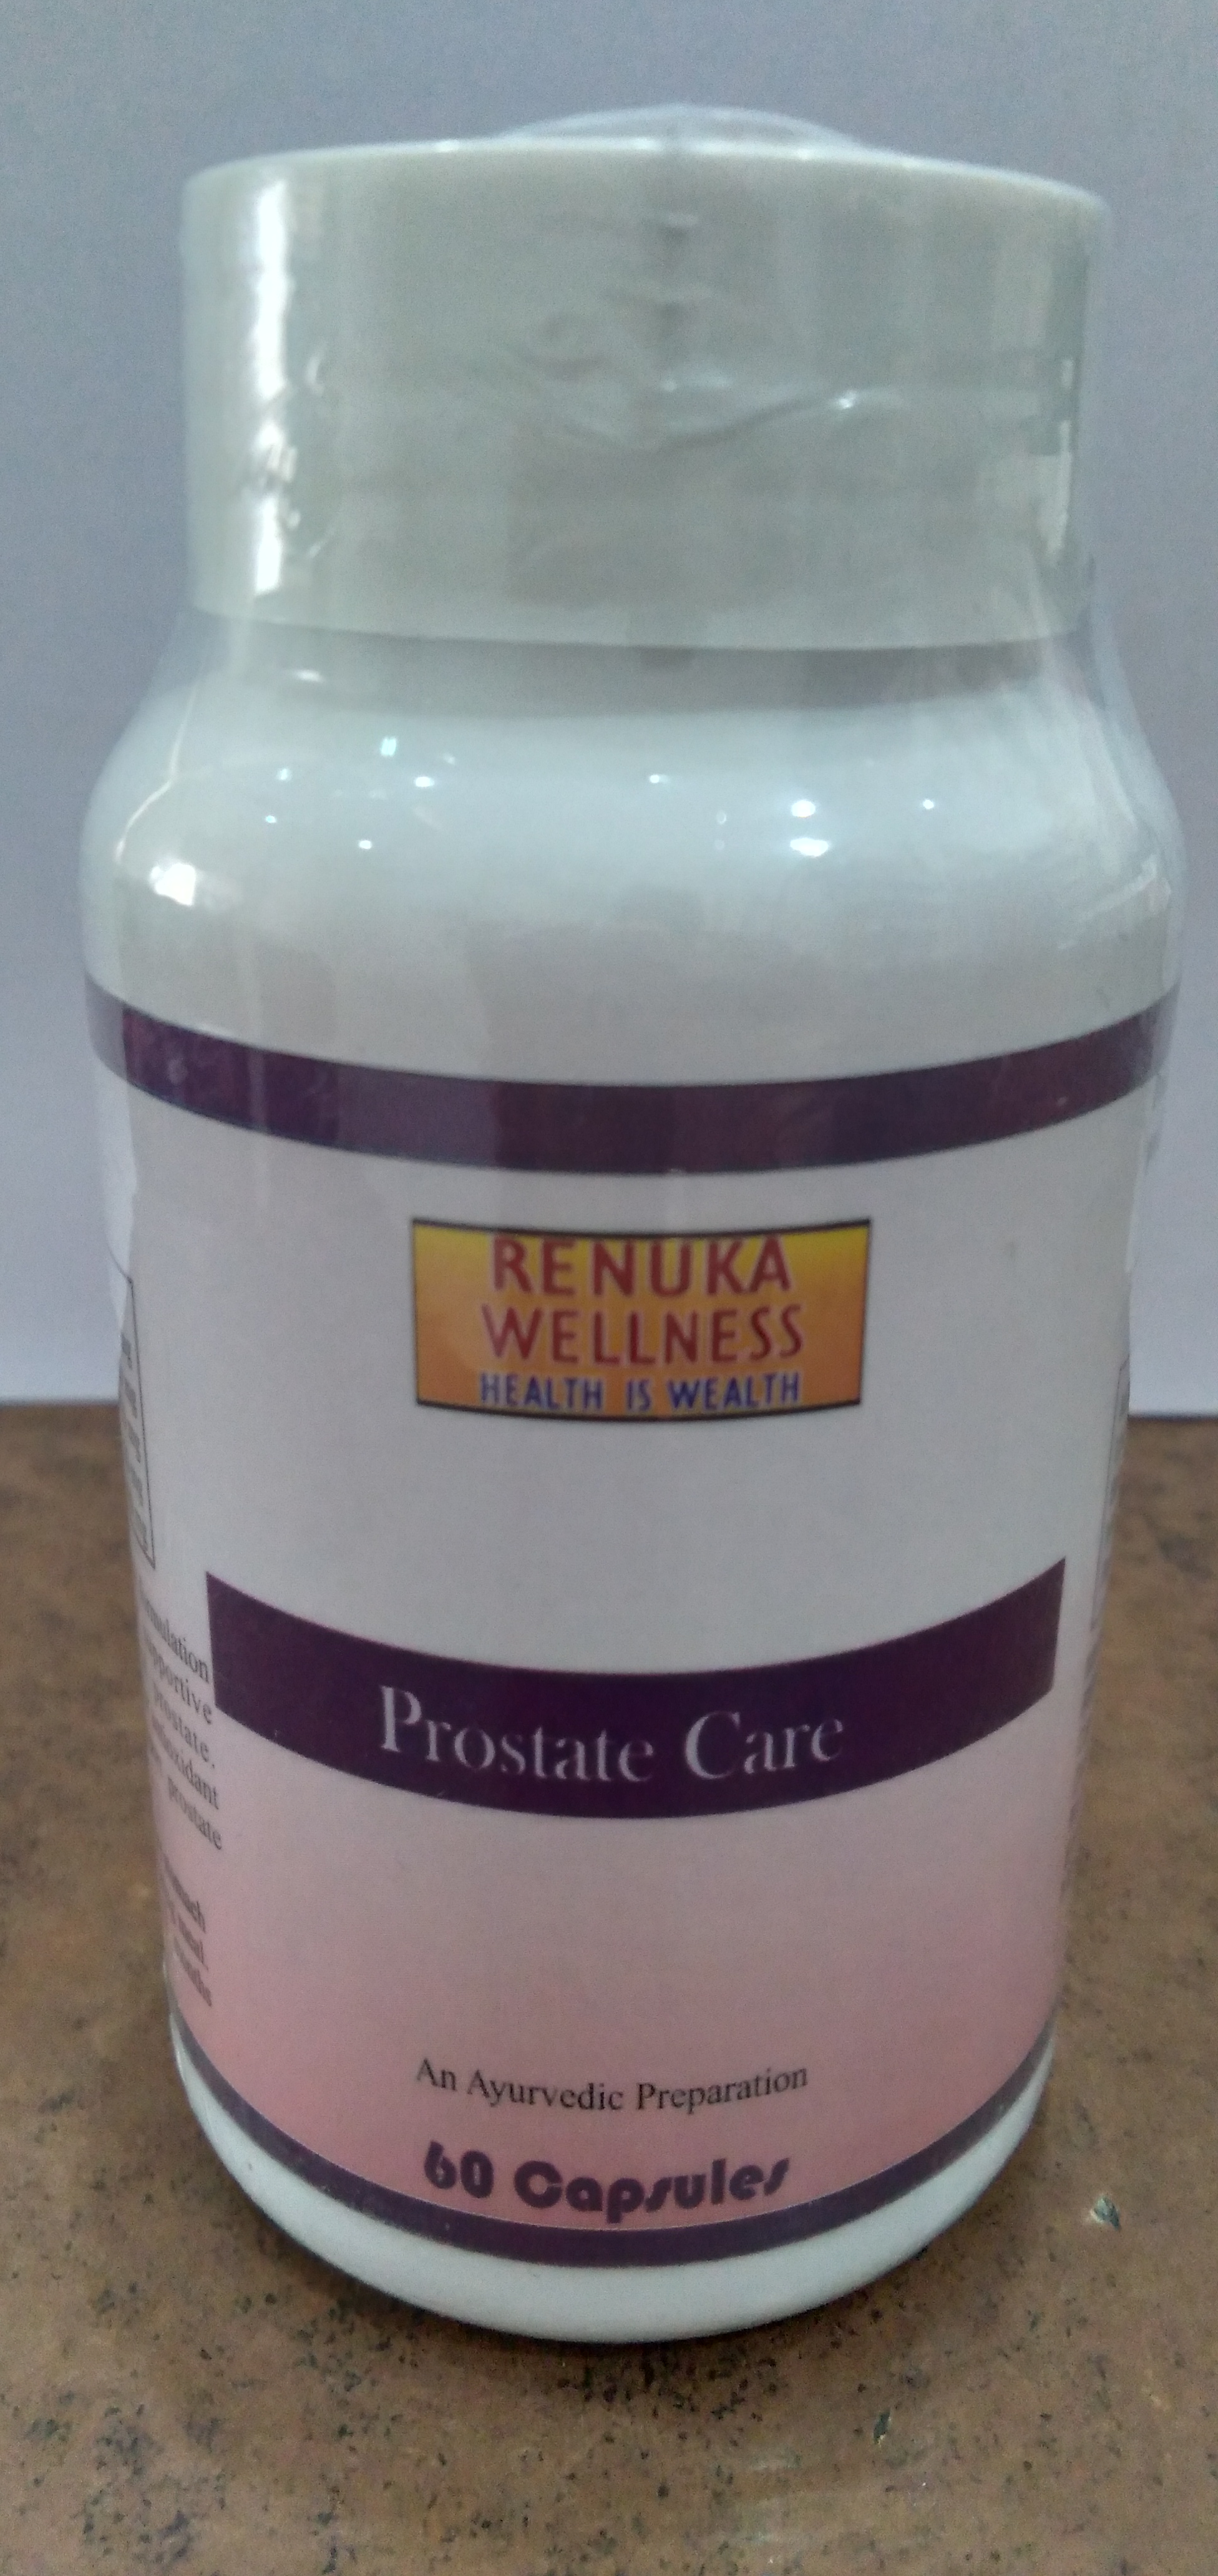 Buy Renuka Wellness PROSTATE CARE CAPSULES- 800 mg at Best Price Online